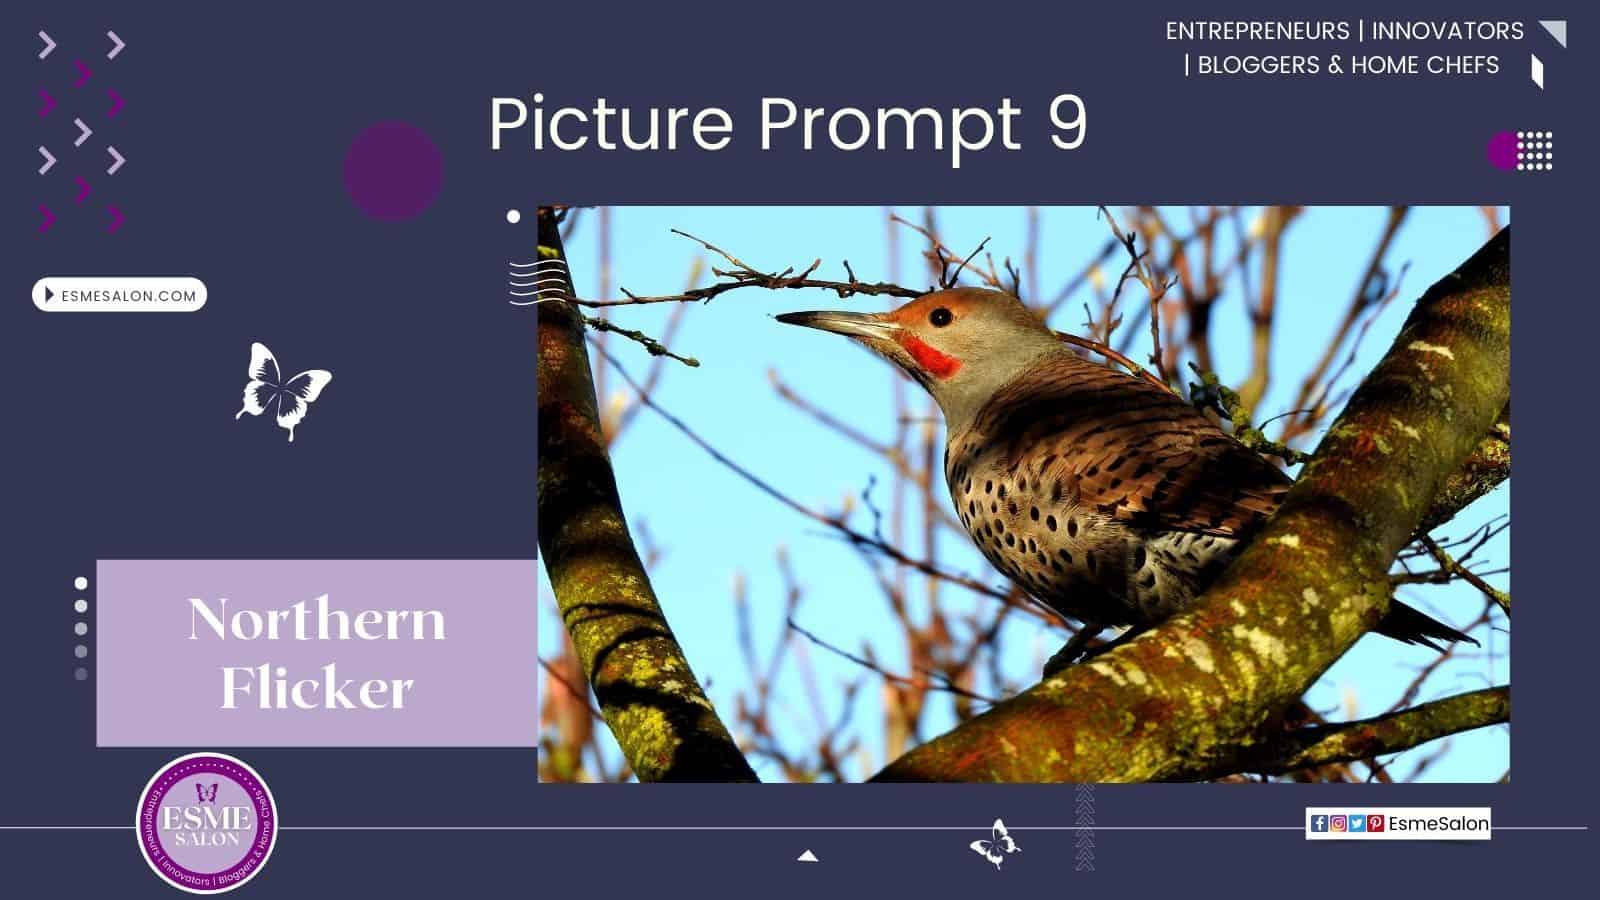 An image of a Northern Flicker Picture Prompt 9